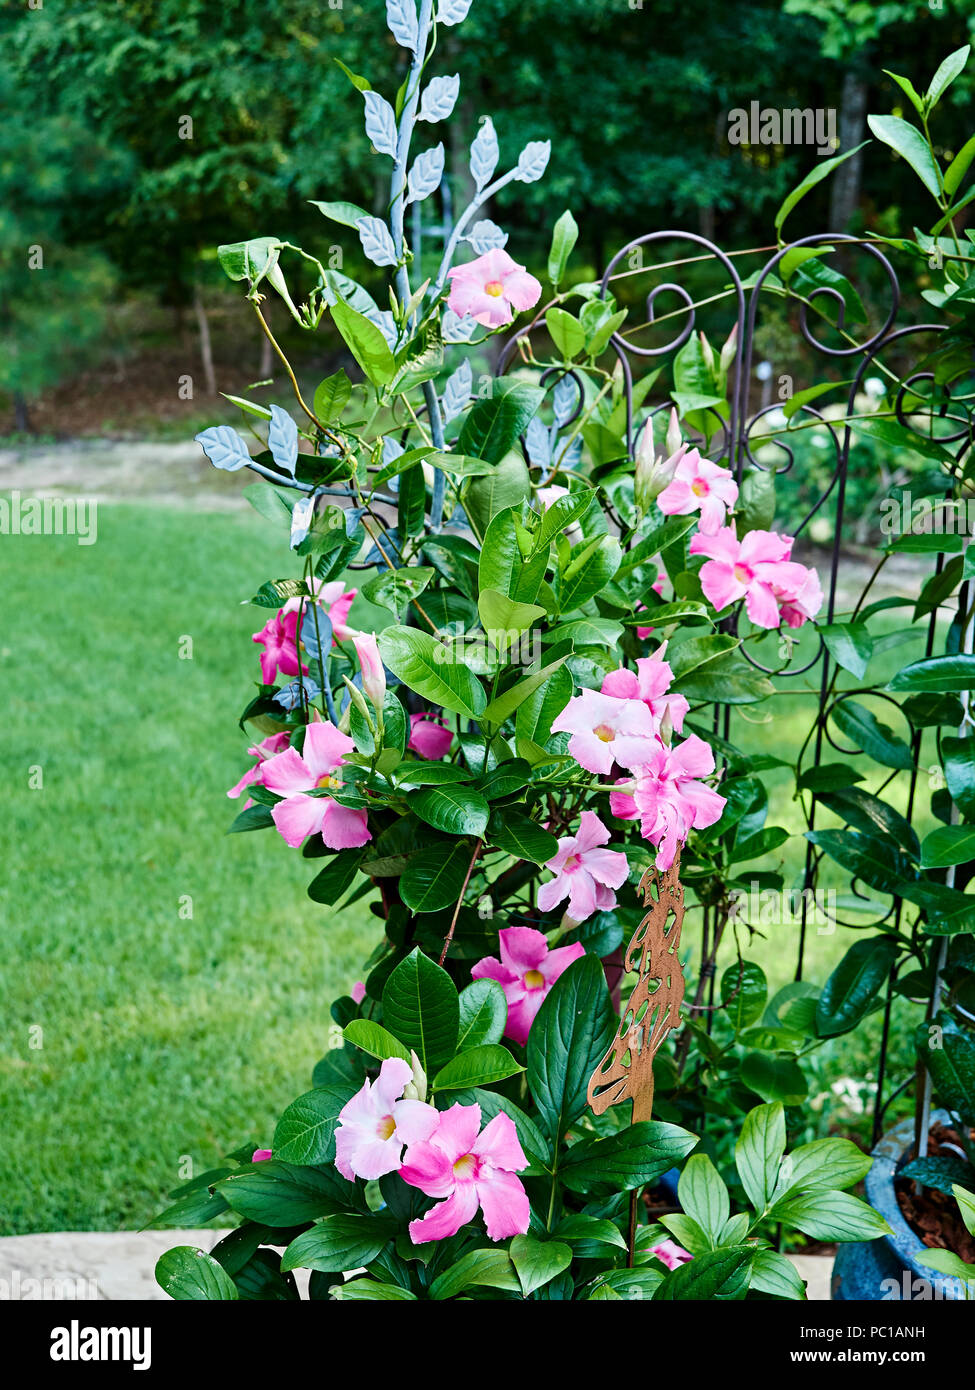 Pink Mandevilla flowering vine belonging to the dogbane family, Apocynaceae, with a common name of rock trumpet growing in a patio garden. Stock Photo